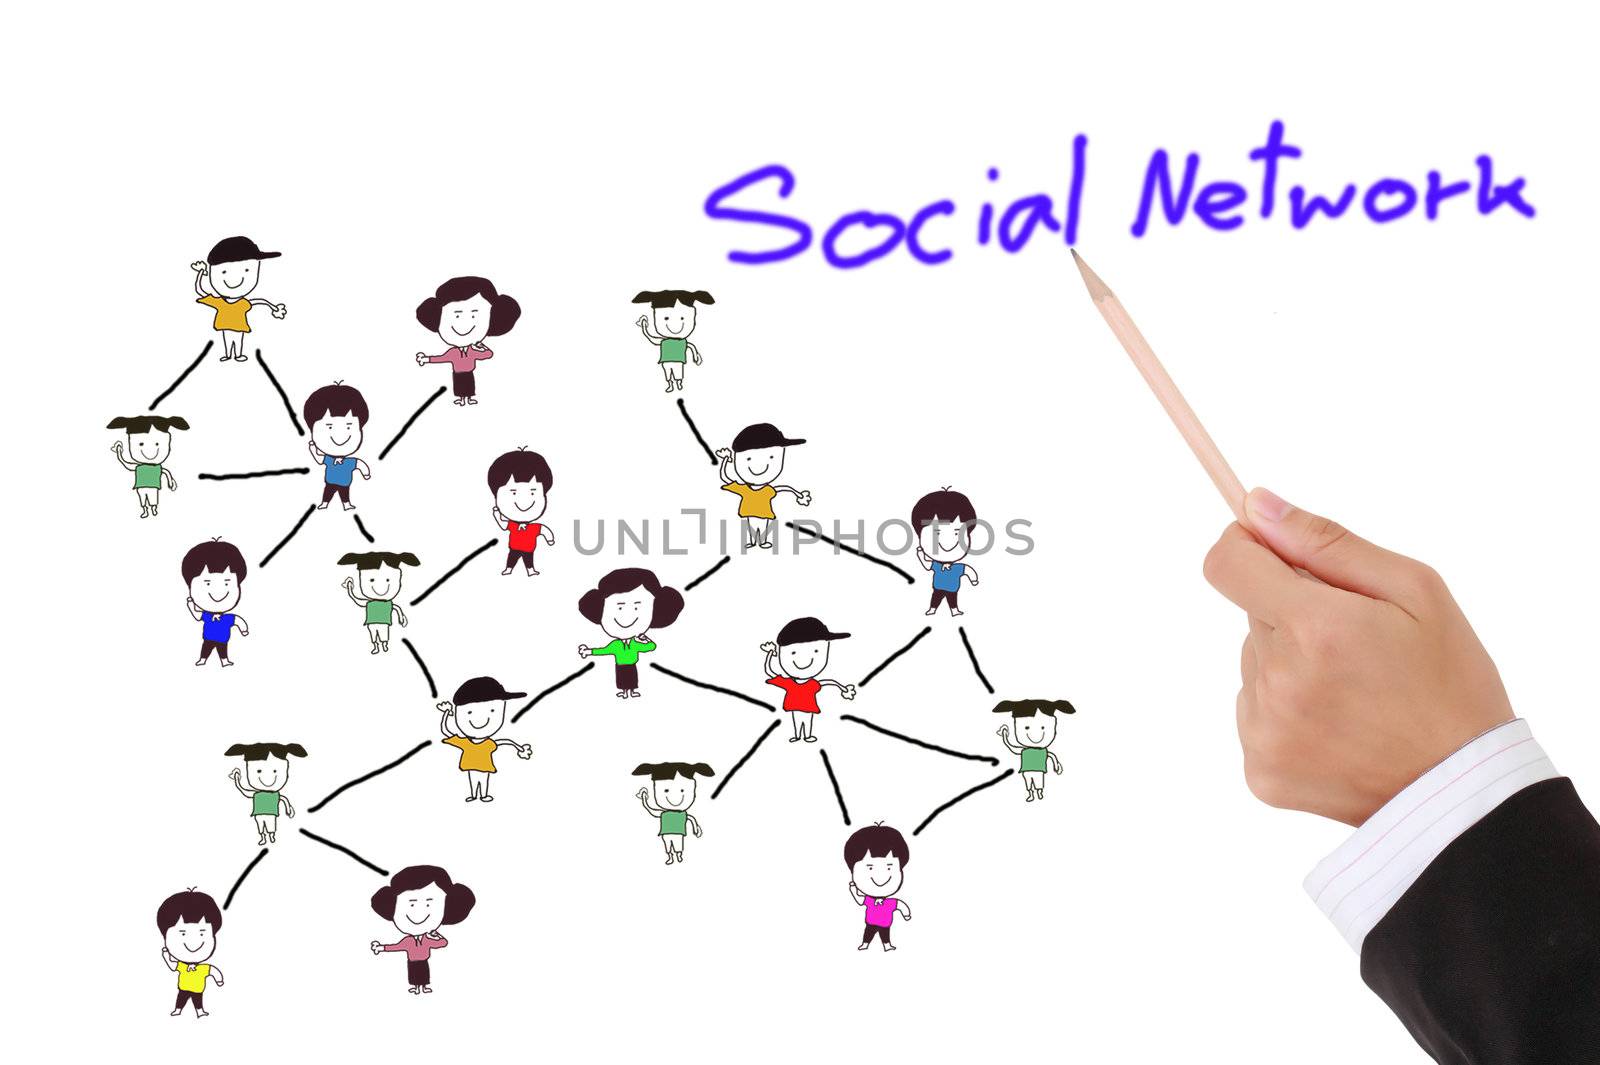 drawing social network structure in a whiteboard  by rufous